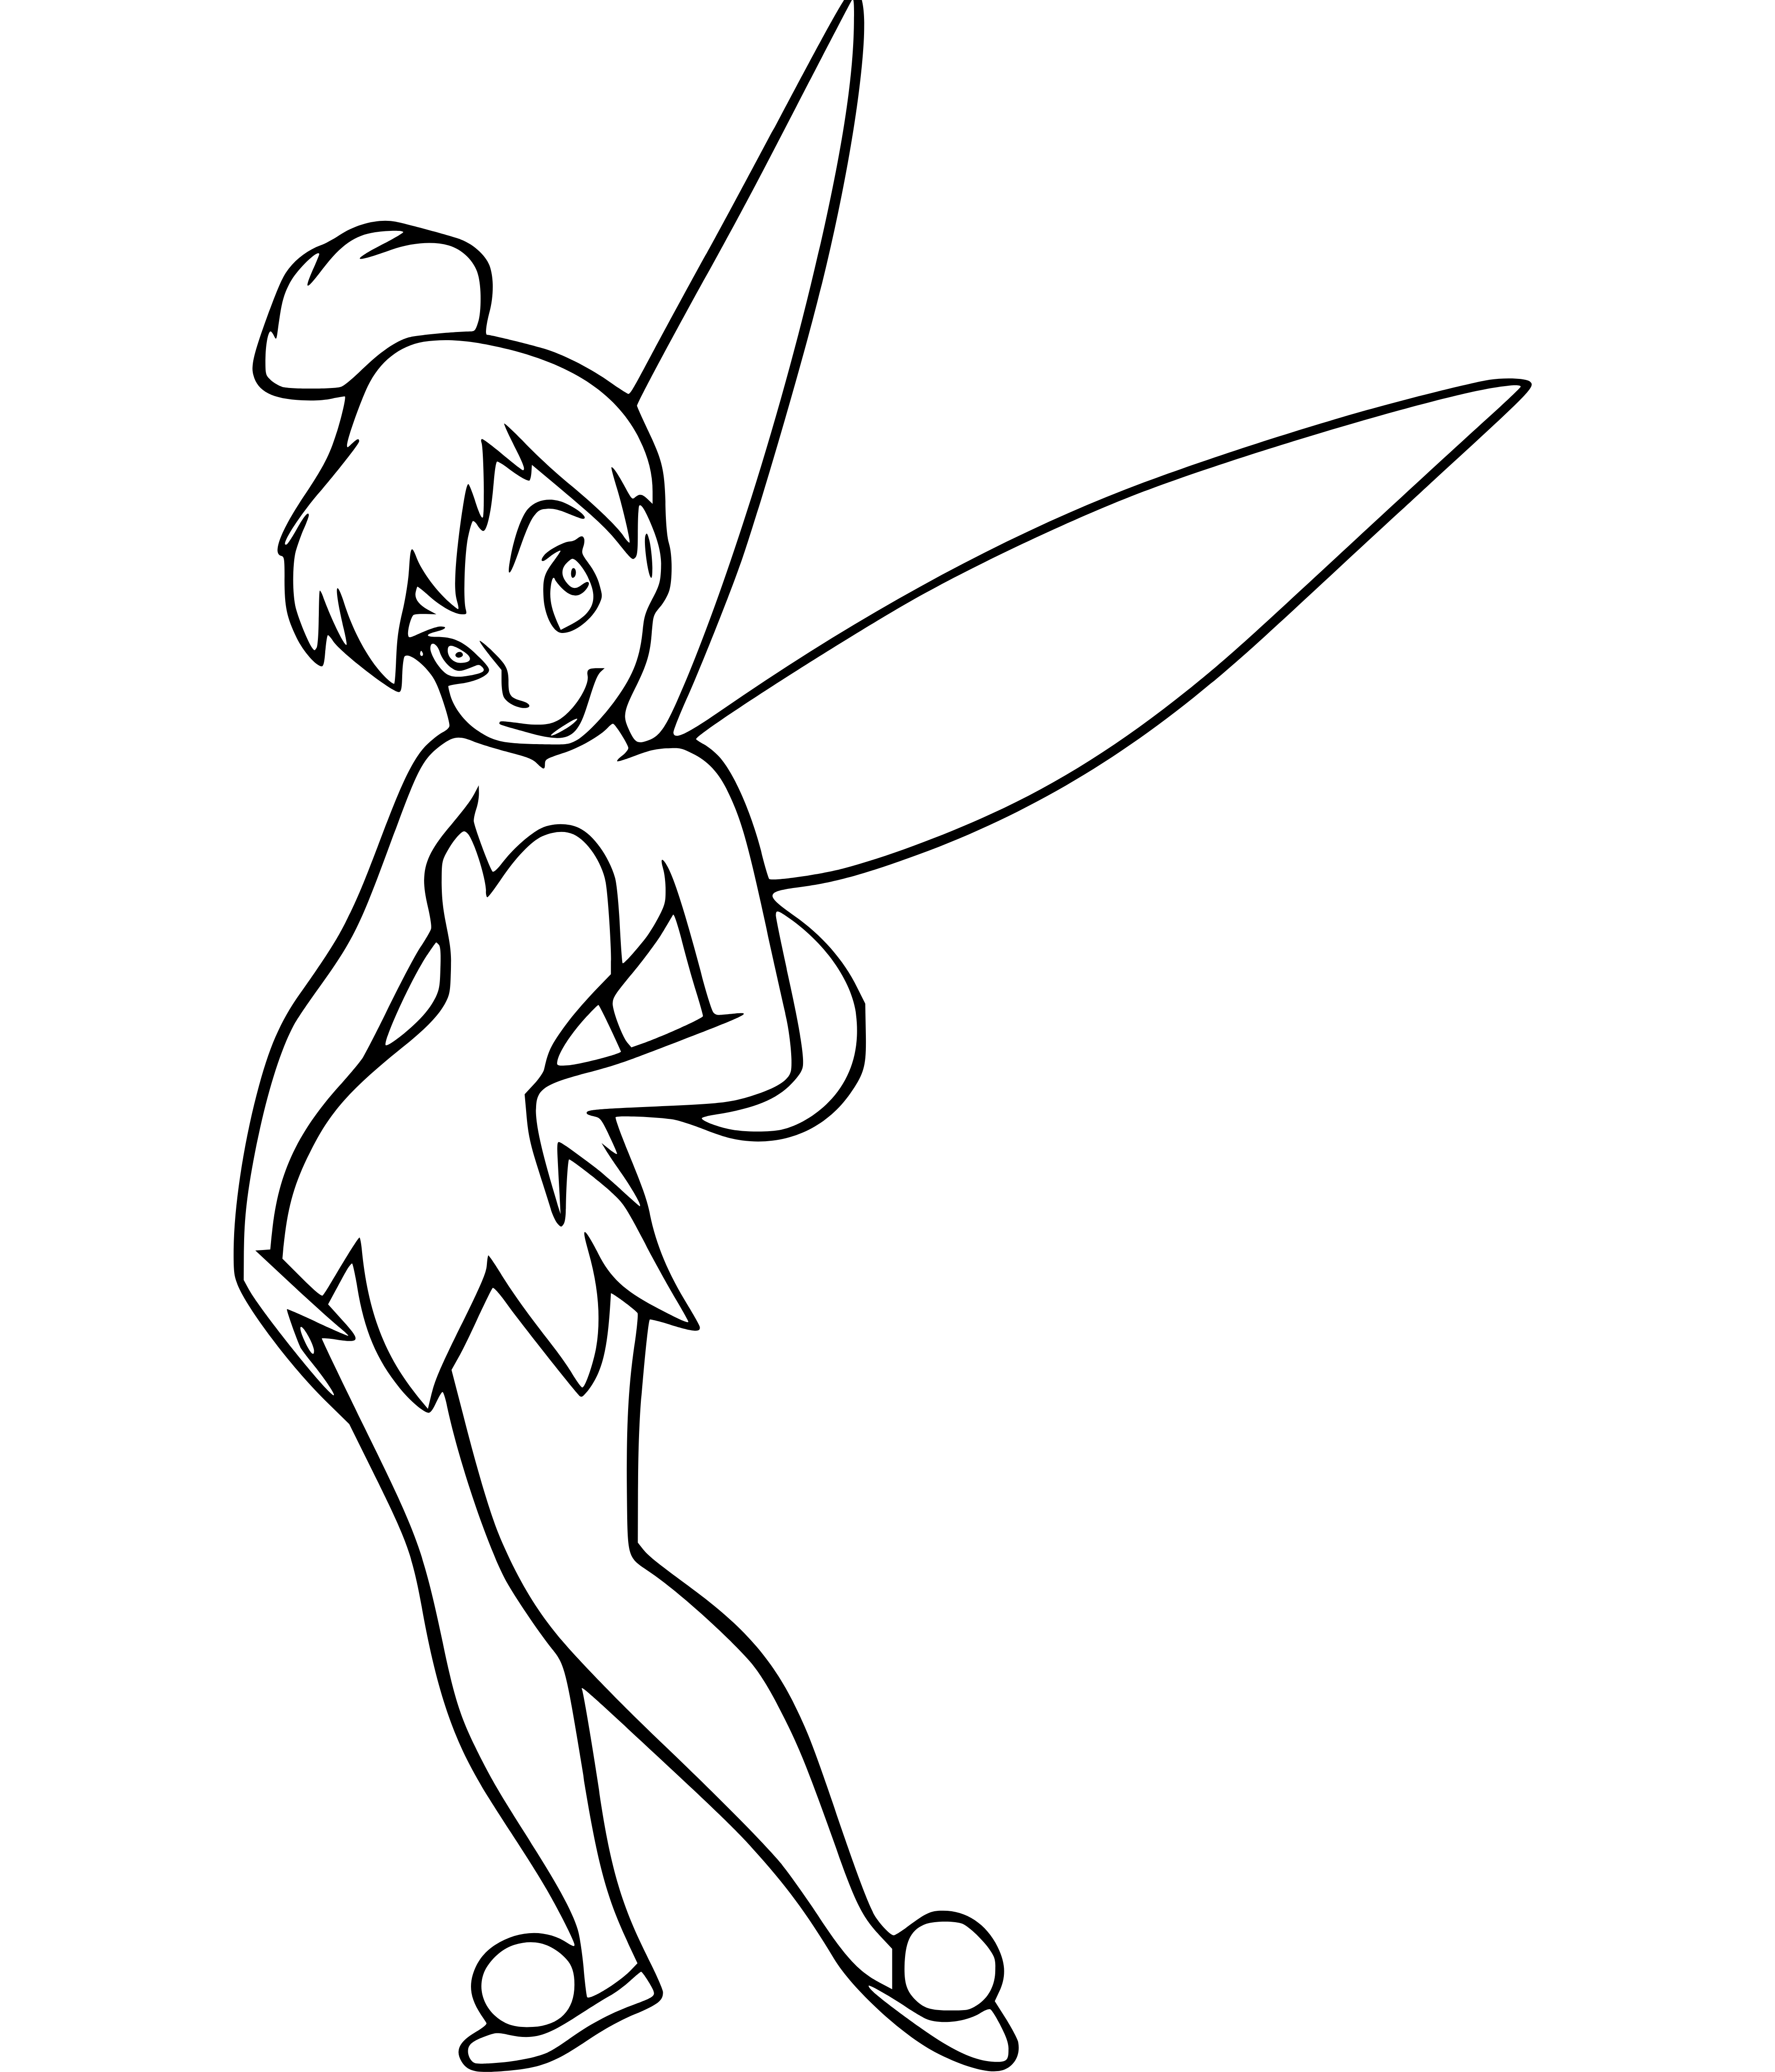 Tinker Bell Lovely Coloring Page for Children - SheetalColor.com